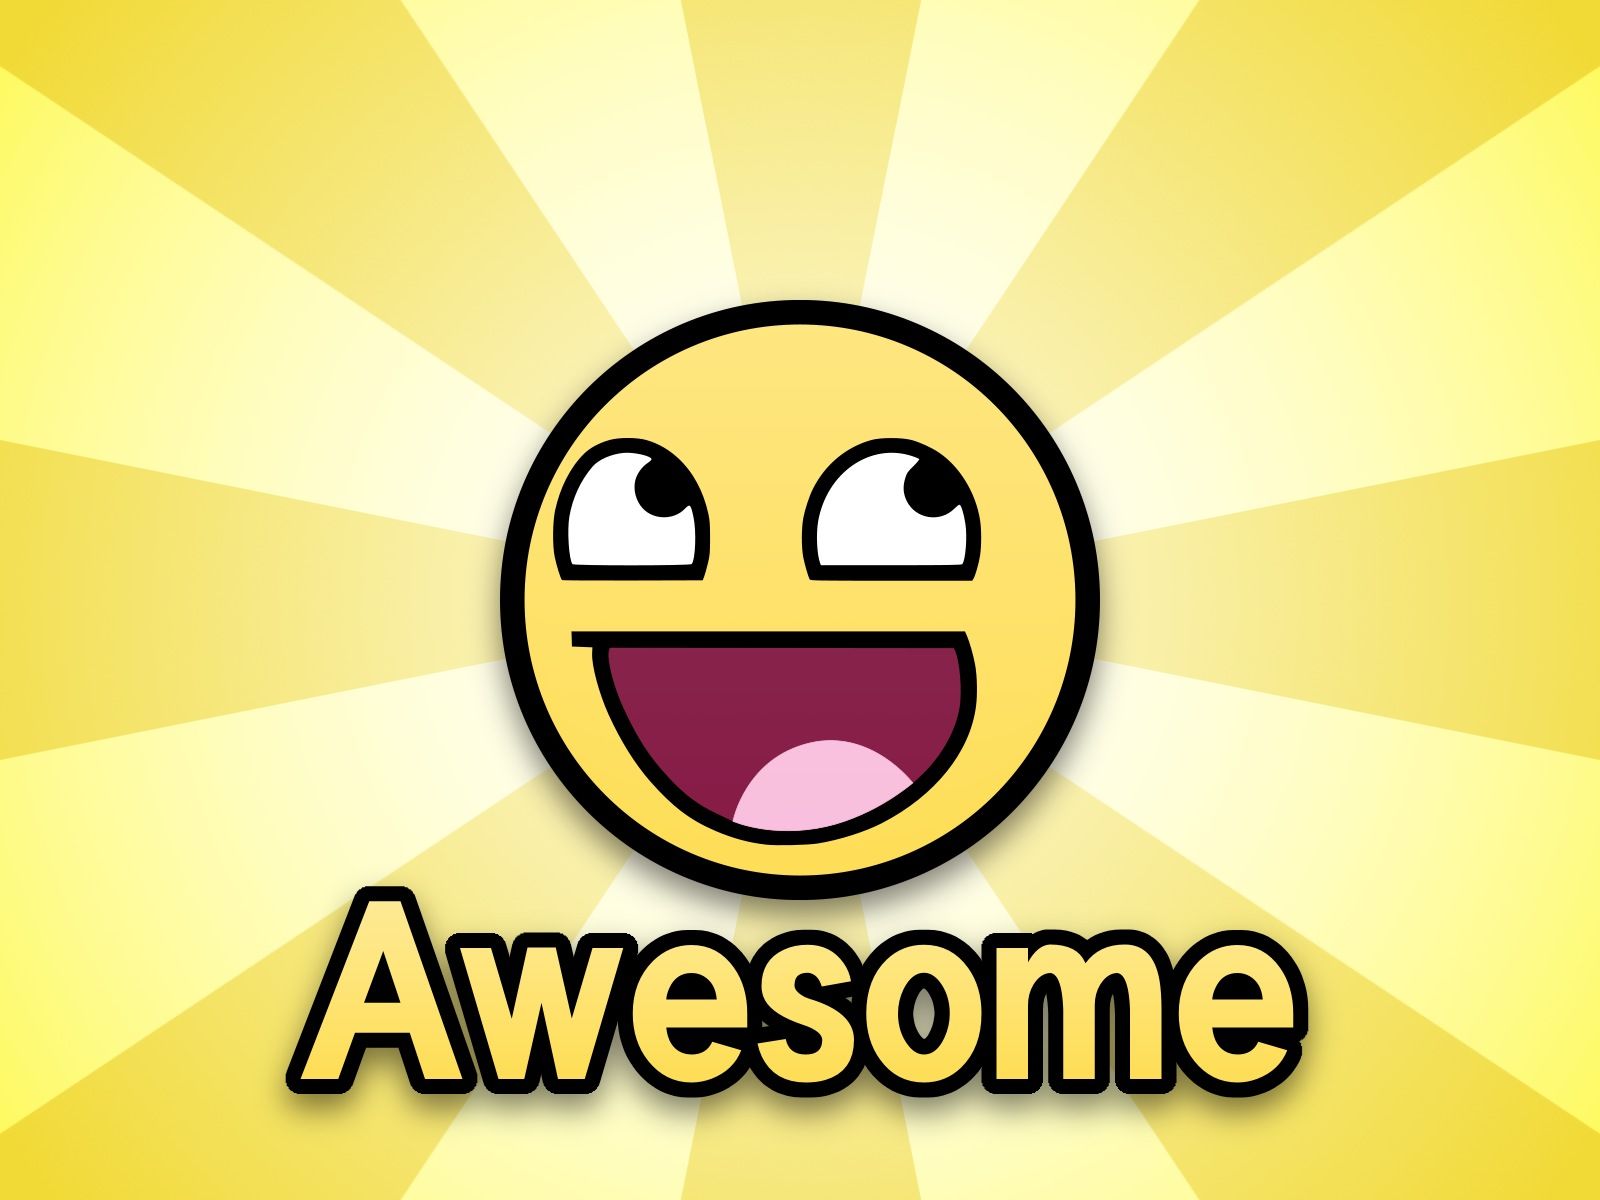 Awesome Smiley Beams Cool Cute Face Meme Nice Wallpaper